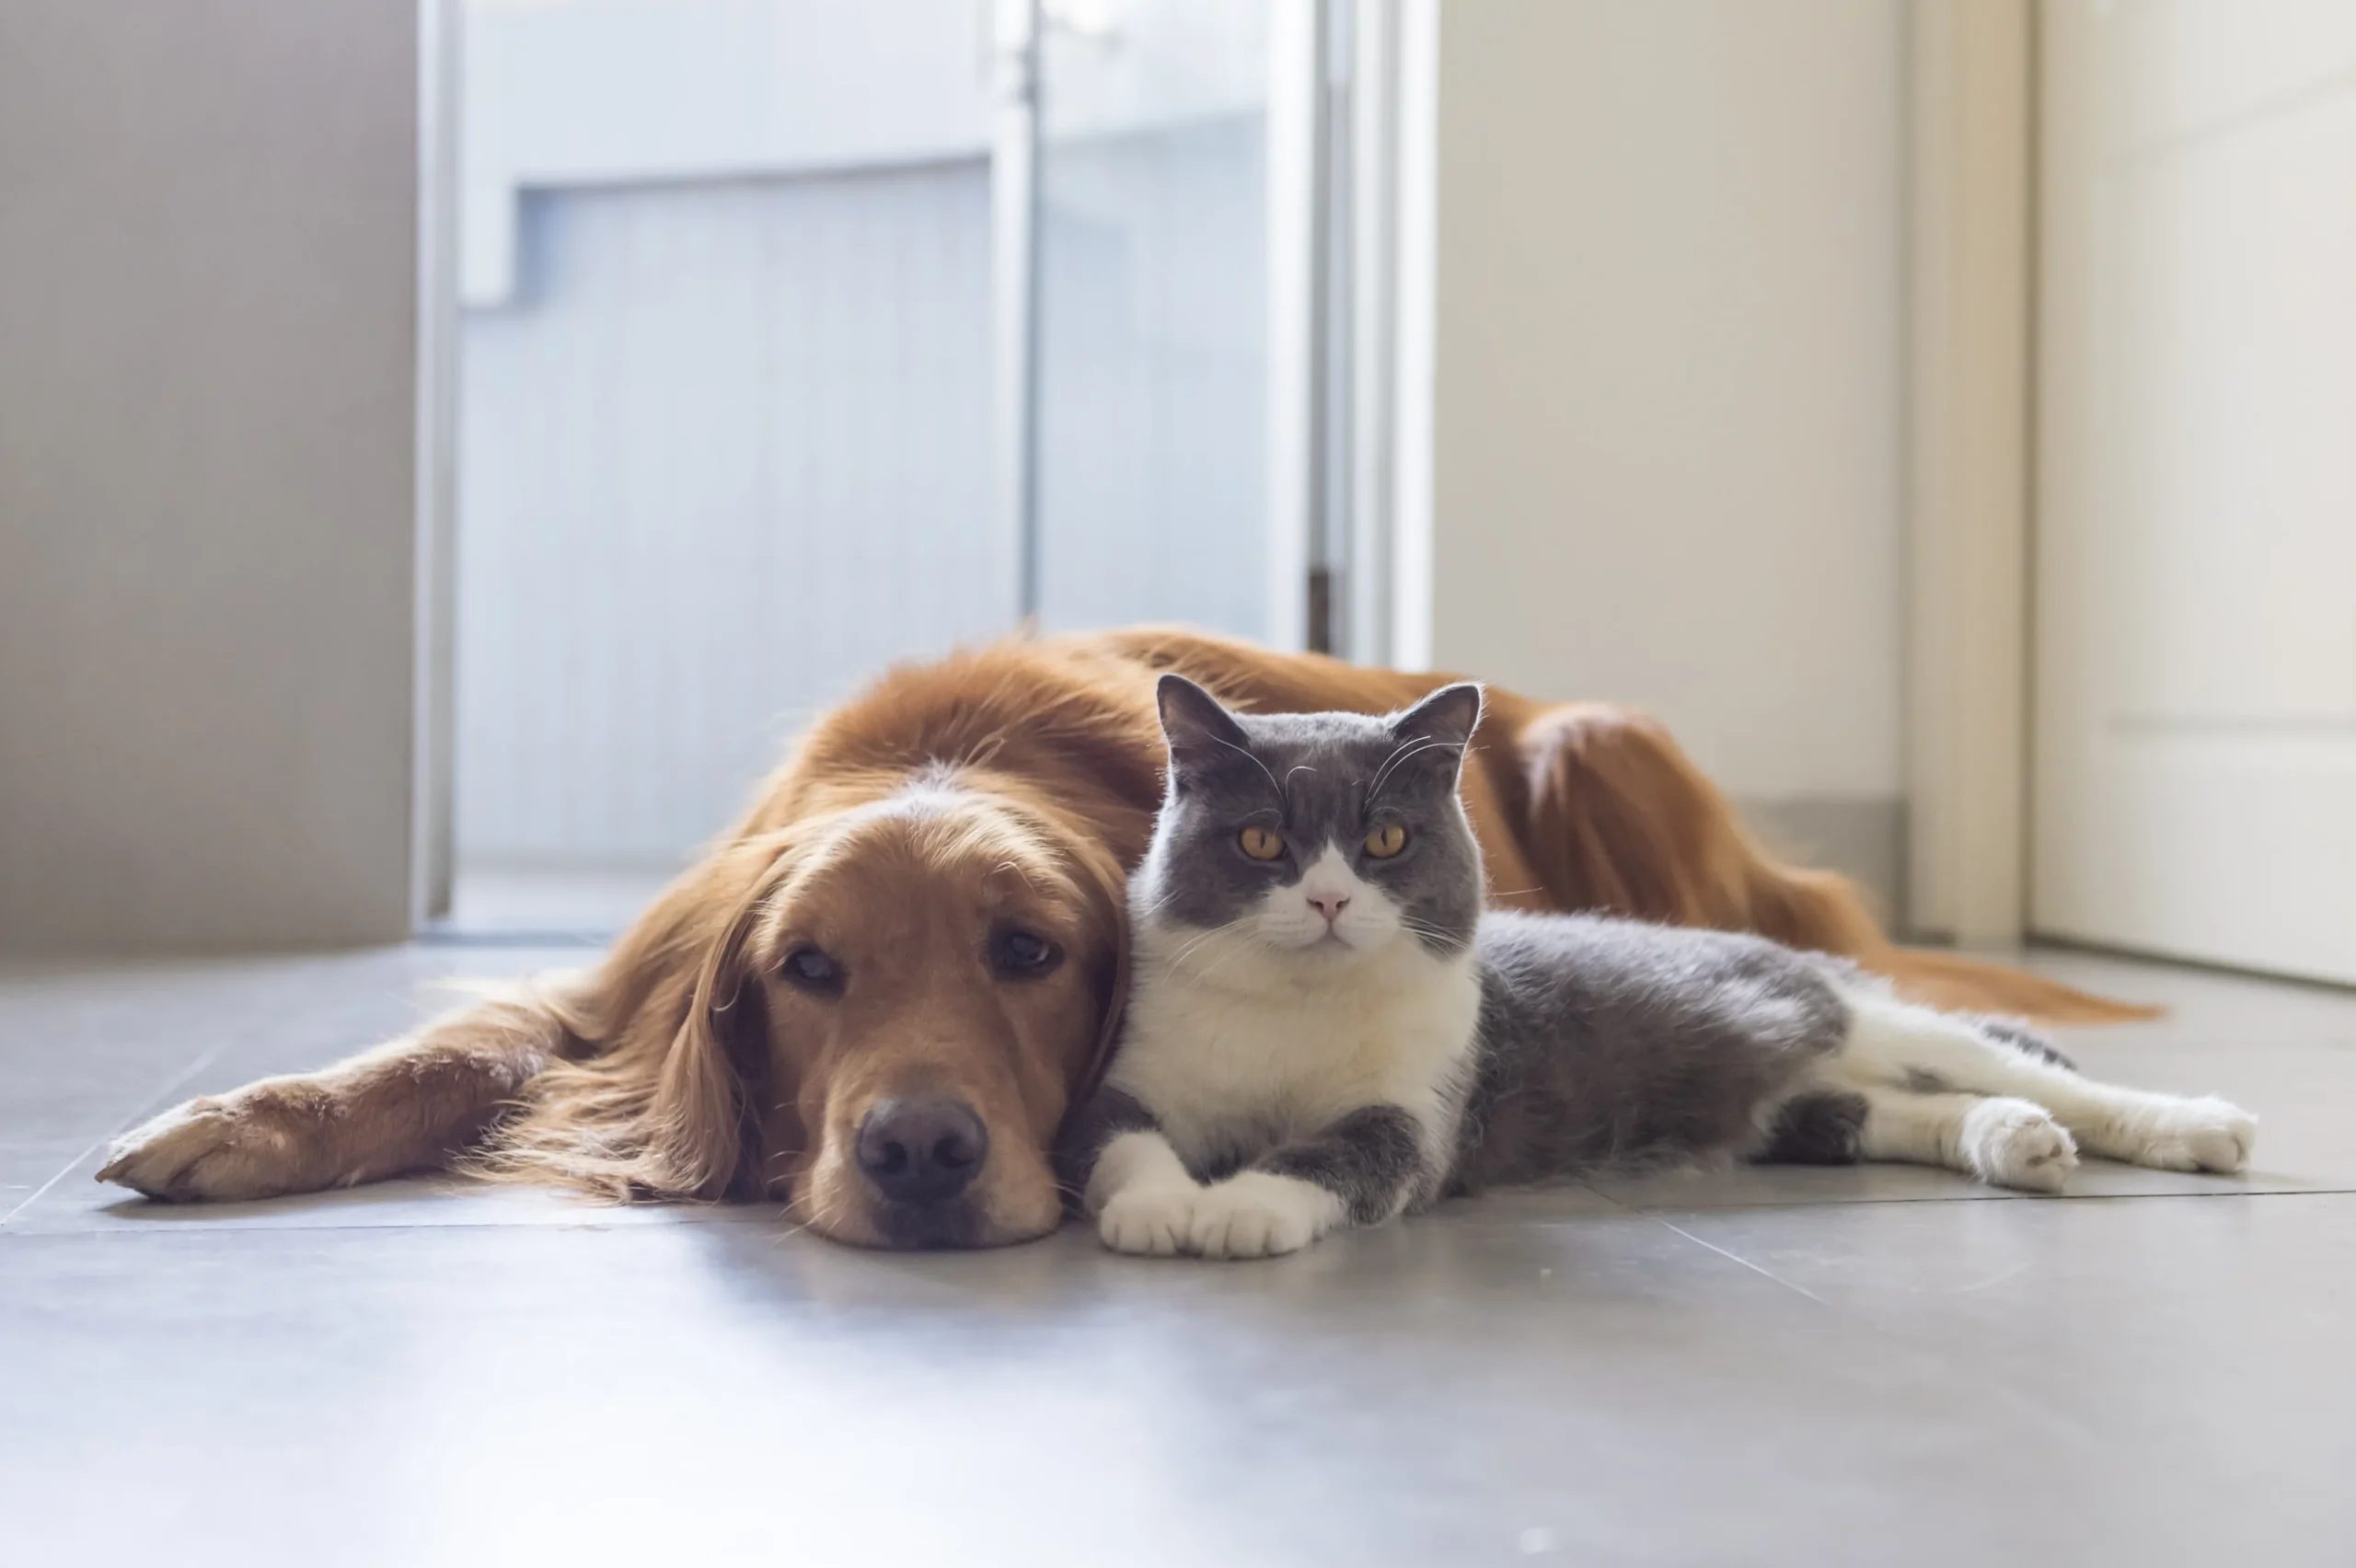 Advantages of Software-Powered Coping Strategies for Pet Care